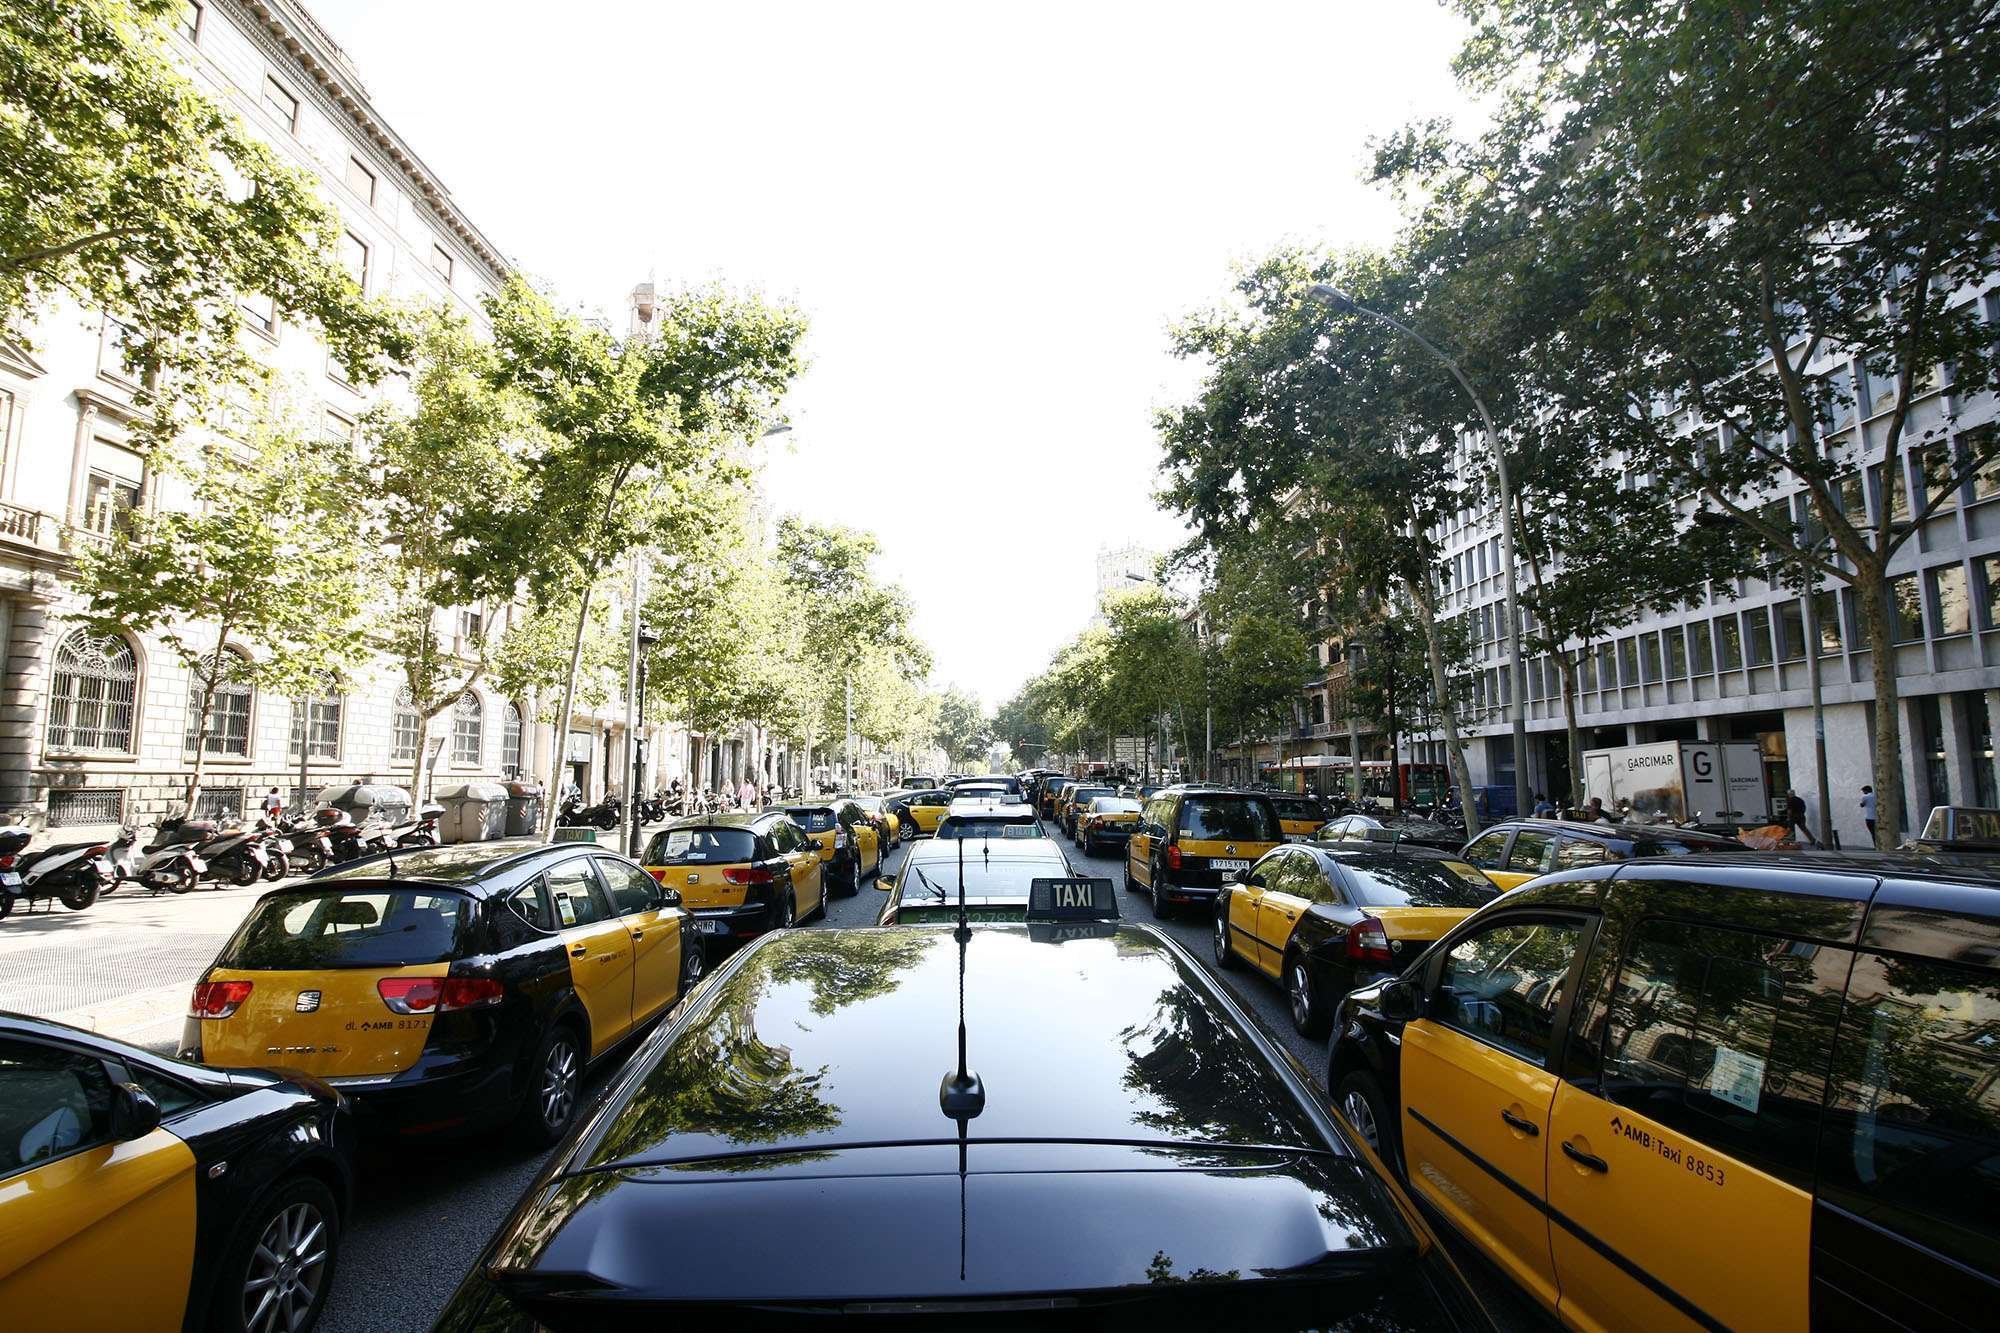 Miroslavo's Photography: Taxis go on on strike in Barcelona